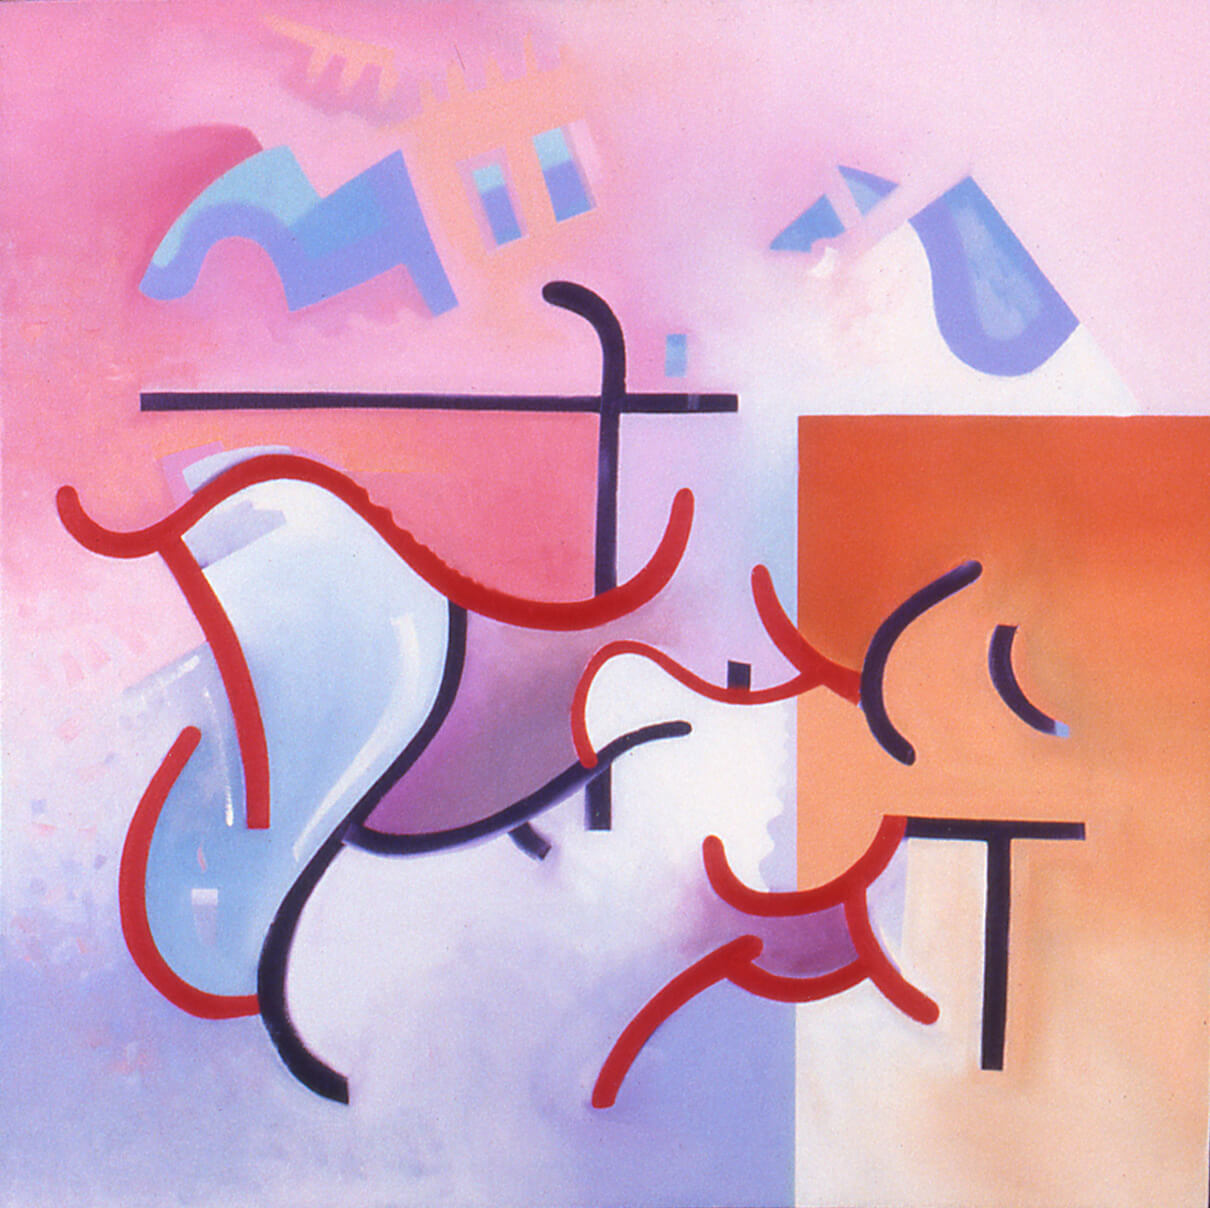 Europa and the Bull a - 36x36, oil on canvas